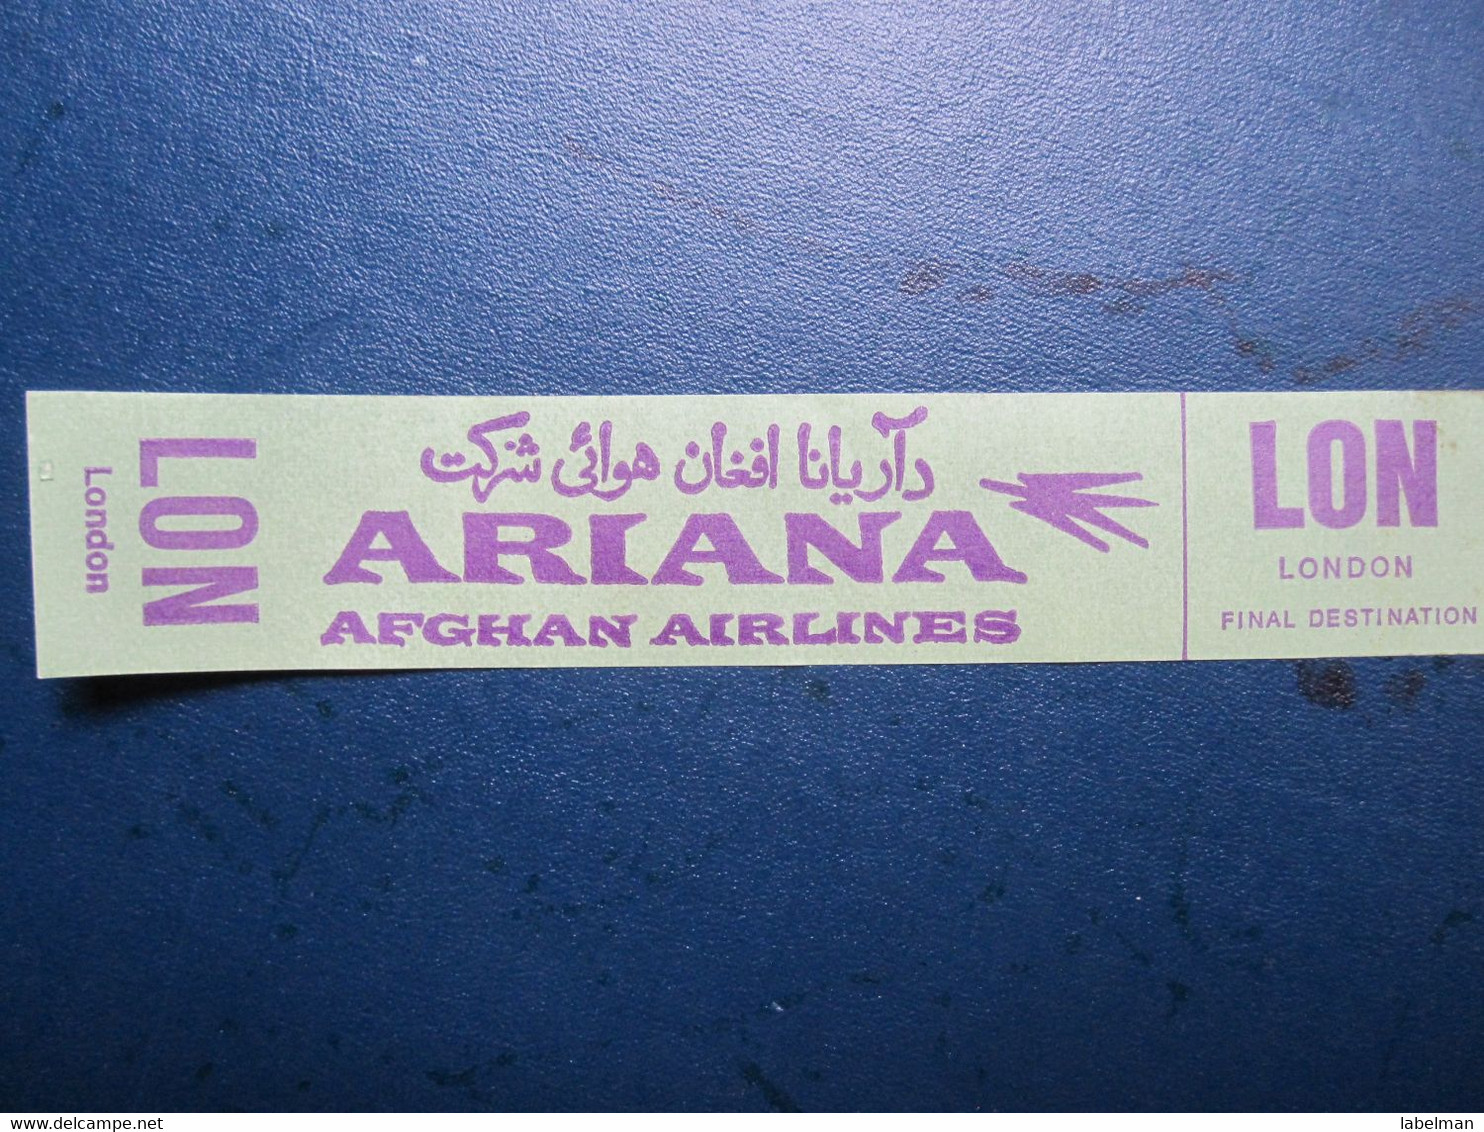 ARIANA AFGHAN AFGHANISTAN CARD TICKET AIRWAYS AIRLINE STICKER LABEL TAG LUGGAGE BUGGAGE PLANE AIRCRAFT AIRPORT - Europa